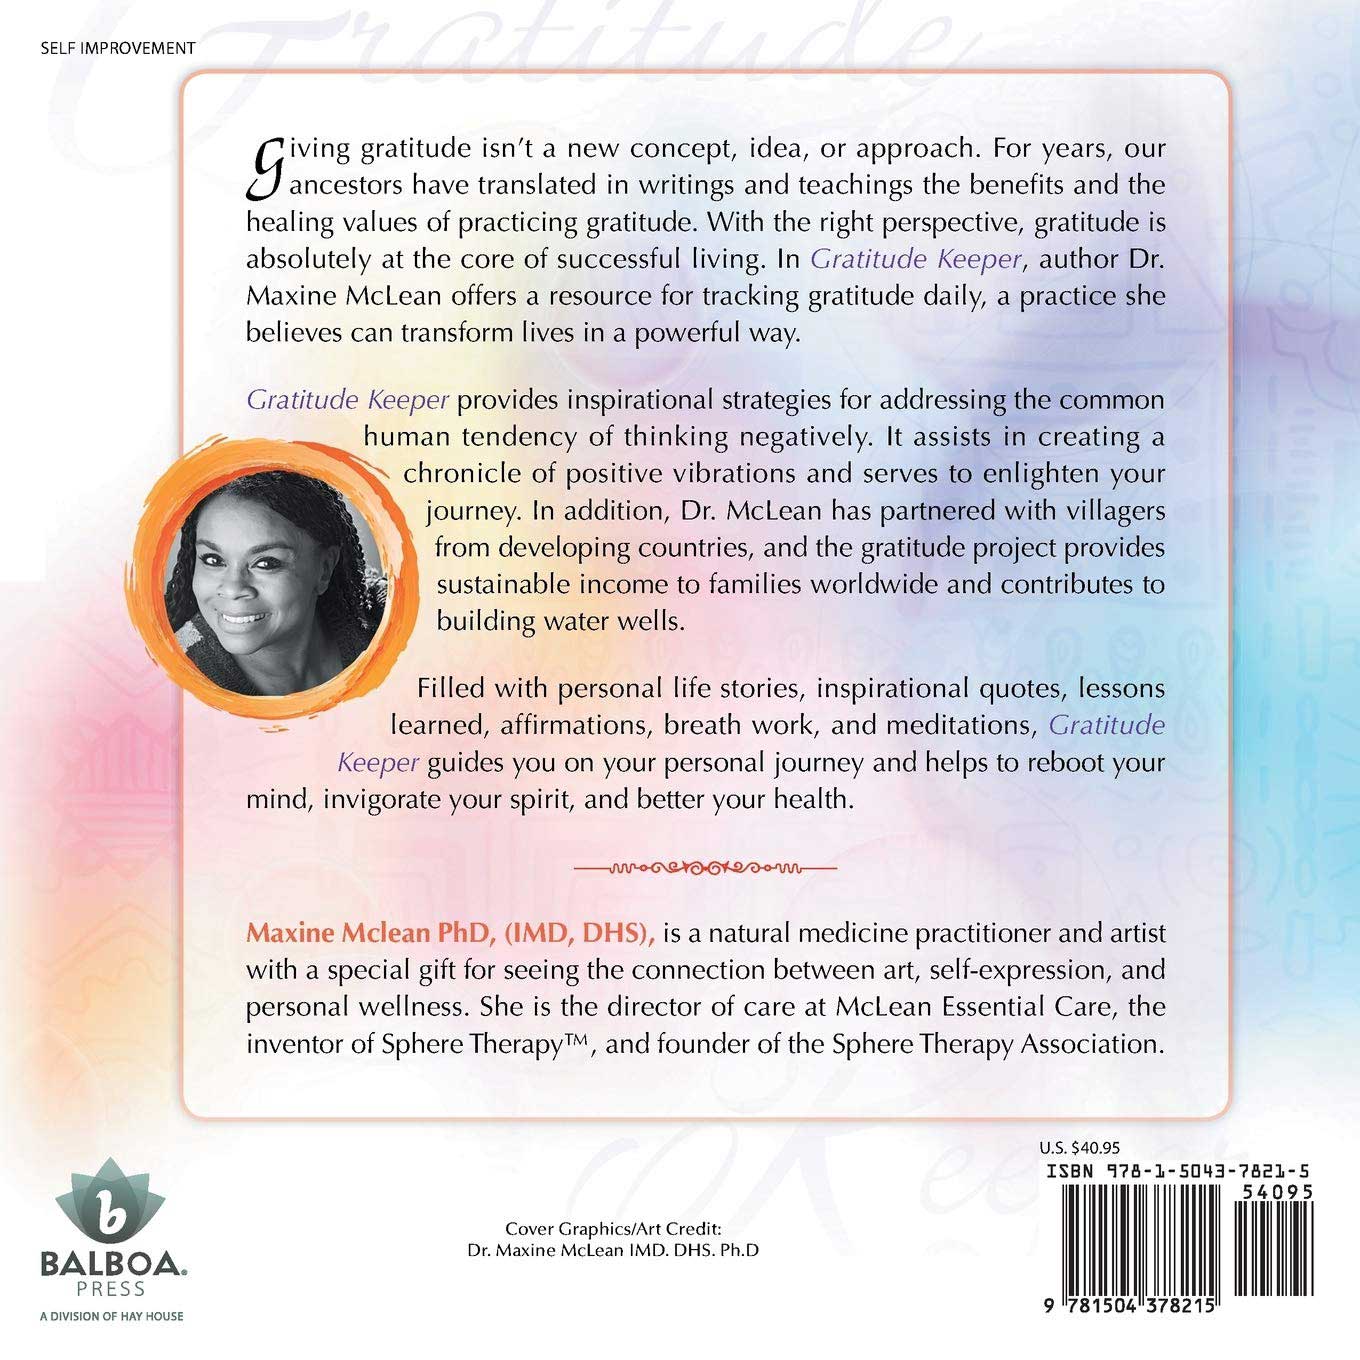 Gratitude Keeper: a year of inspiration, one day at a time by Dr. Maxine McLean